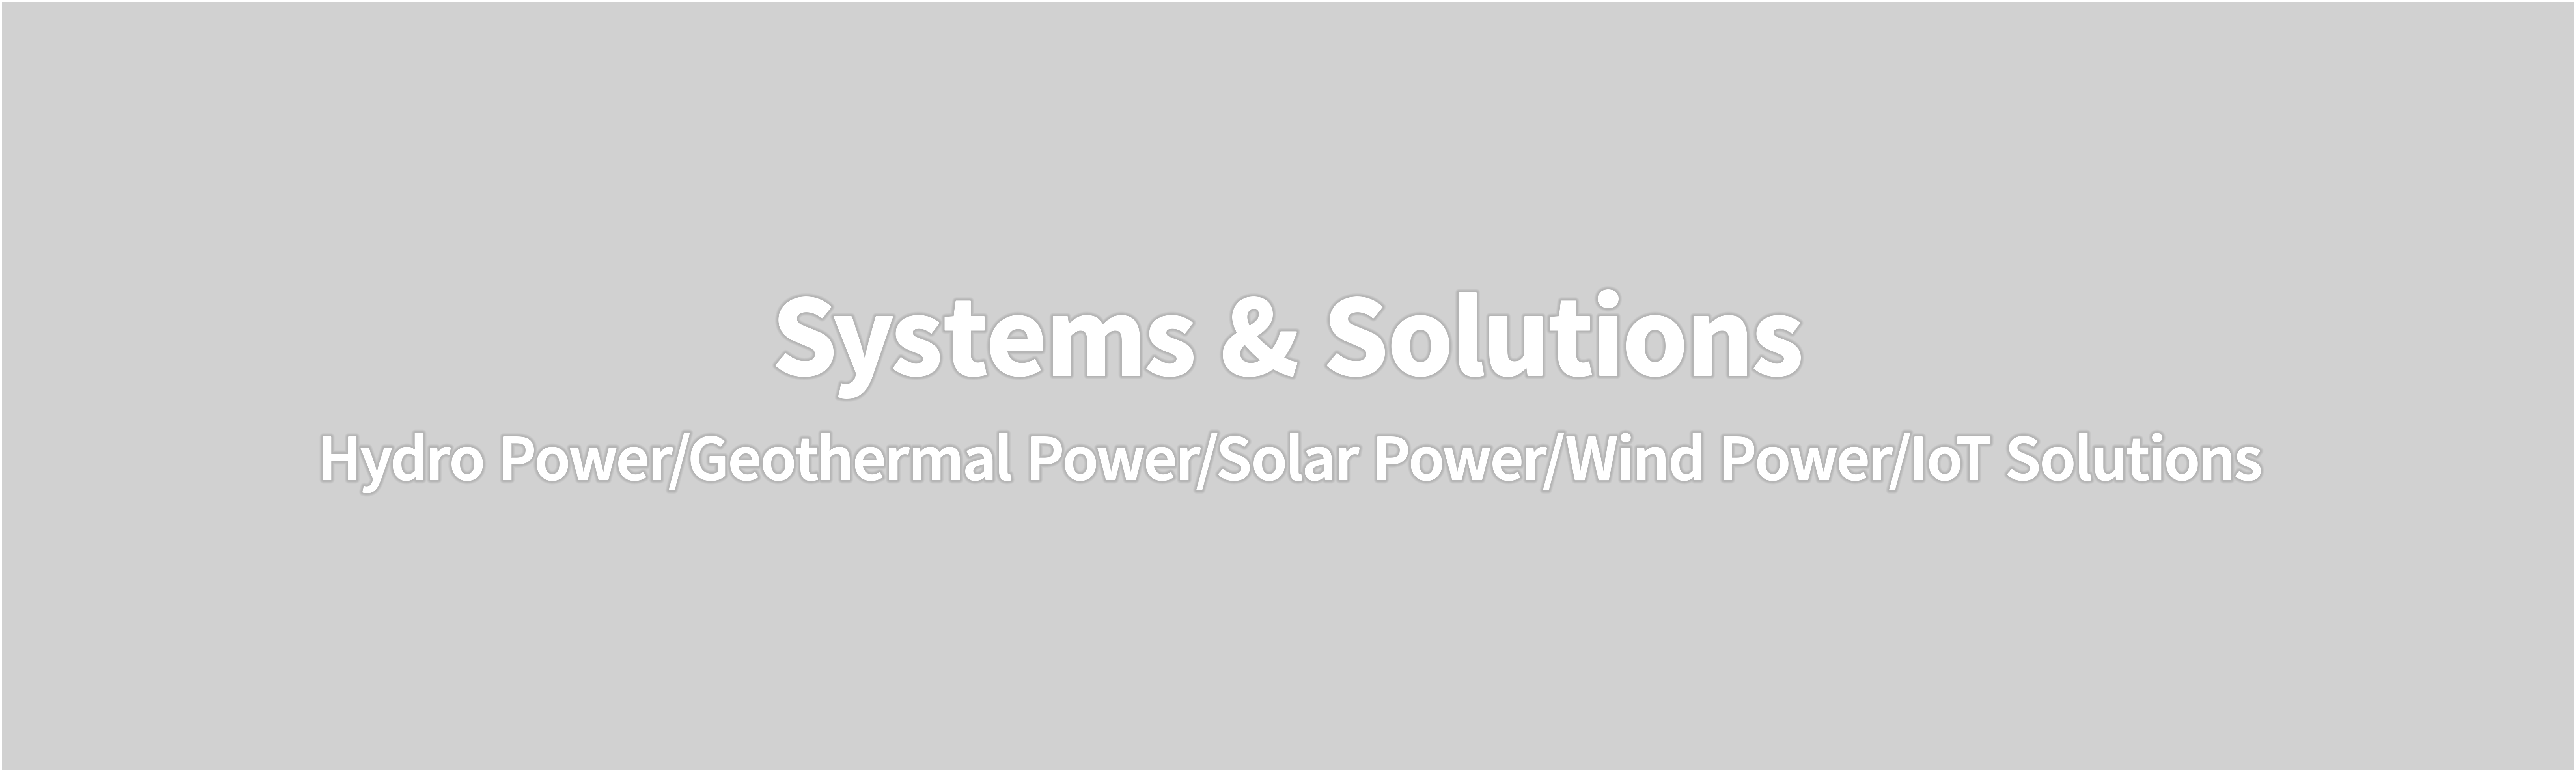 Systems & Solutions Hydro Power/Geothermal Power/Solar Power/Wind Power/IoT Solutions